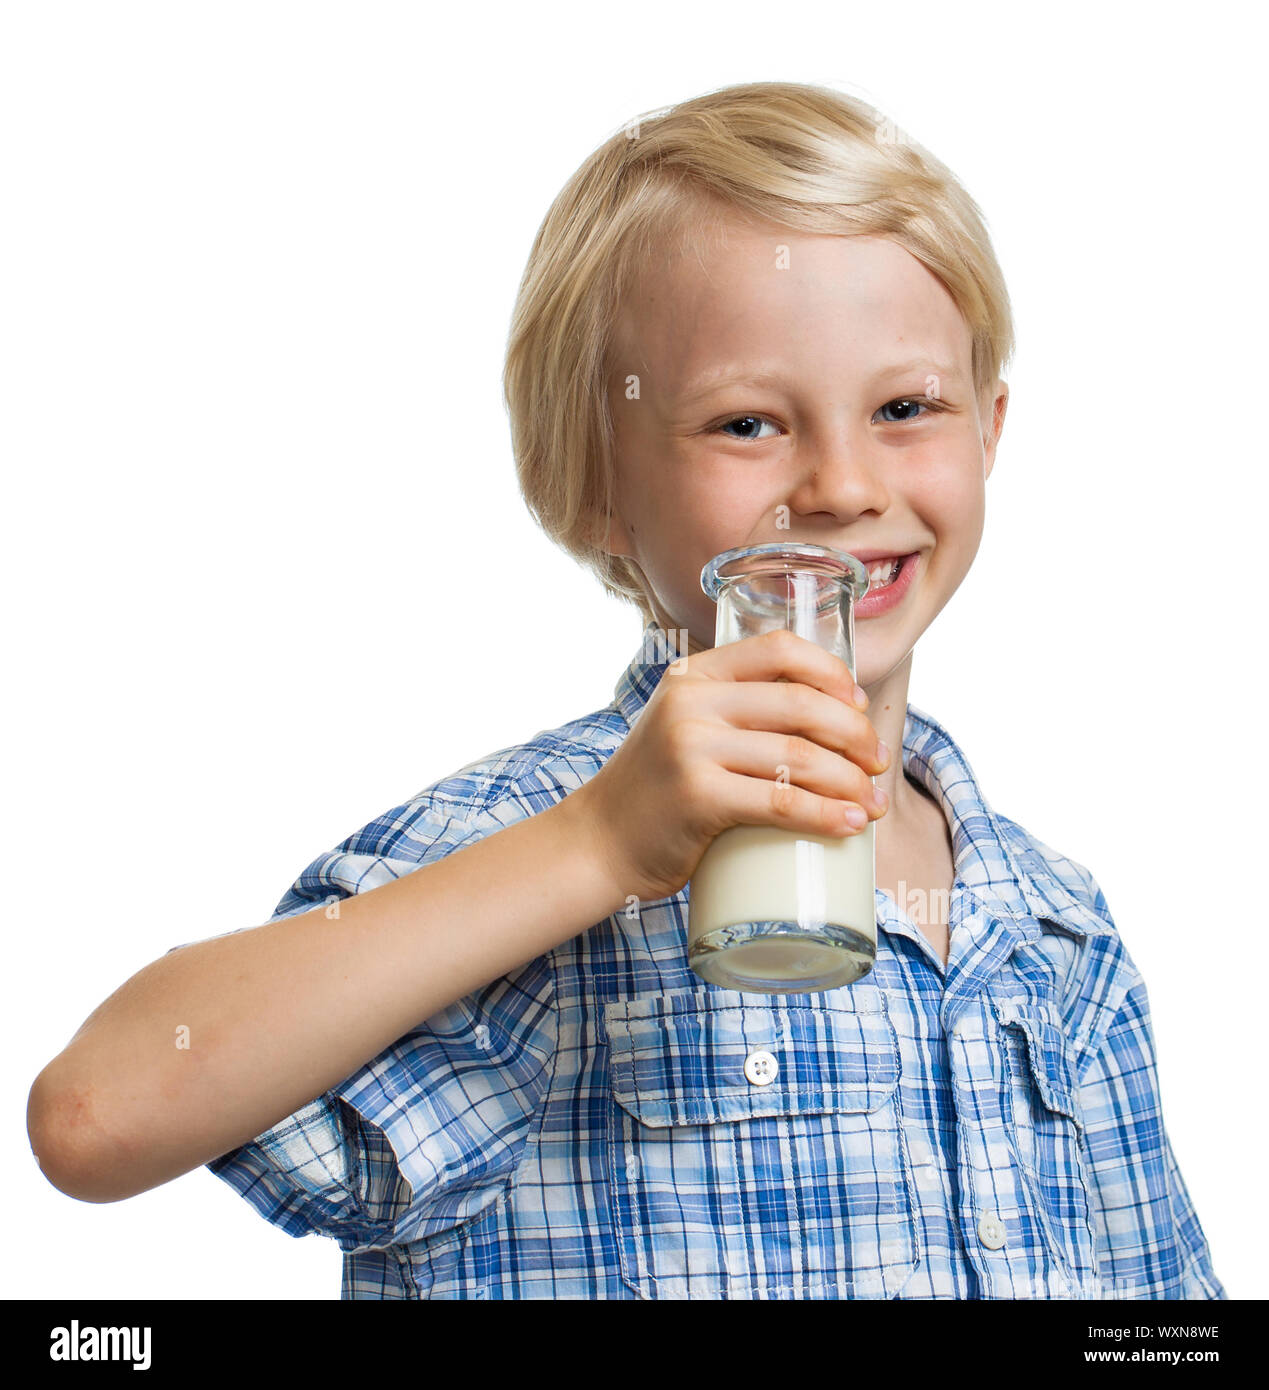 Smiling cute boy about to drink out of a bottle of milk. Isolated on white. Stock Photo